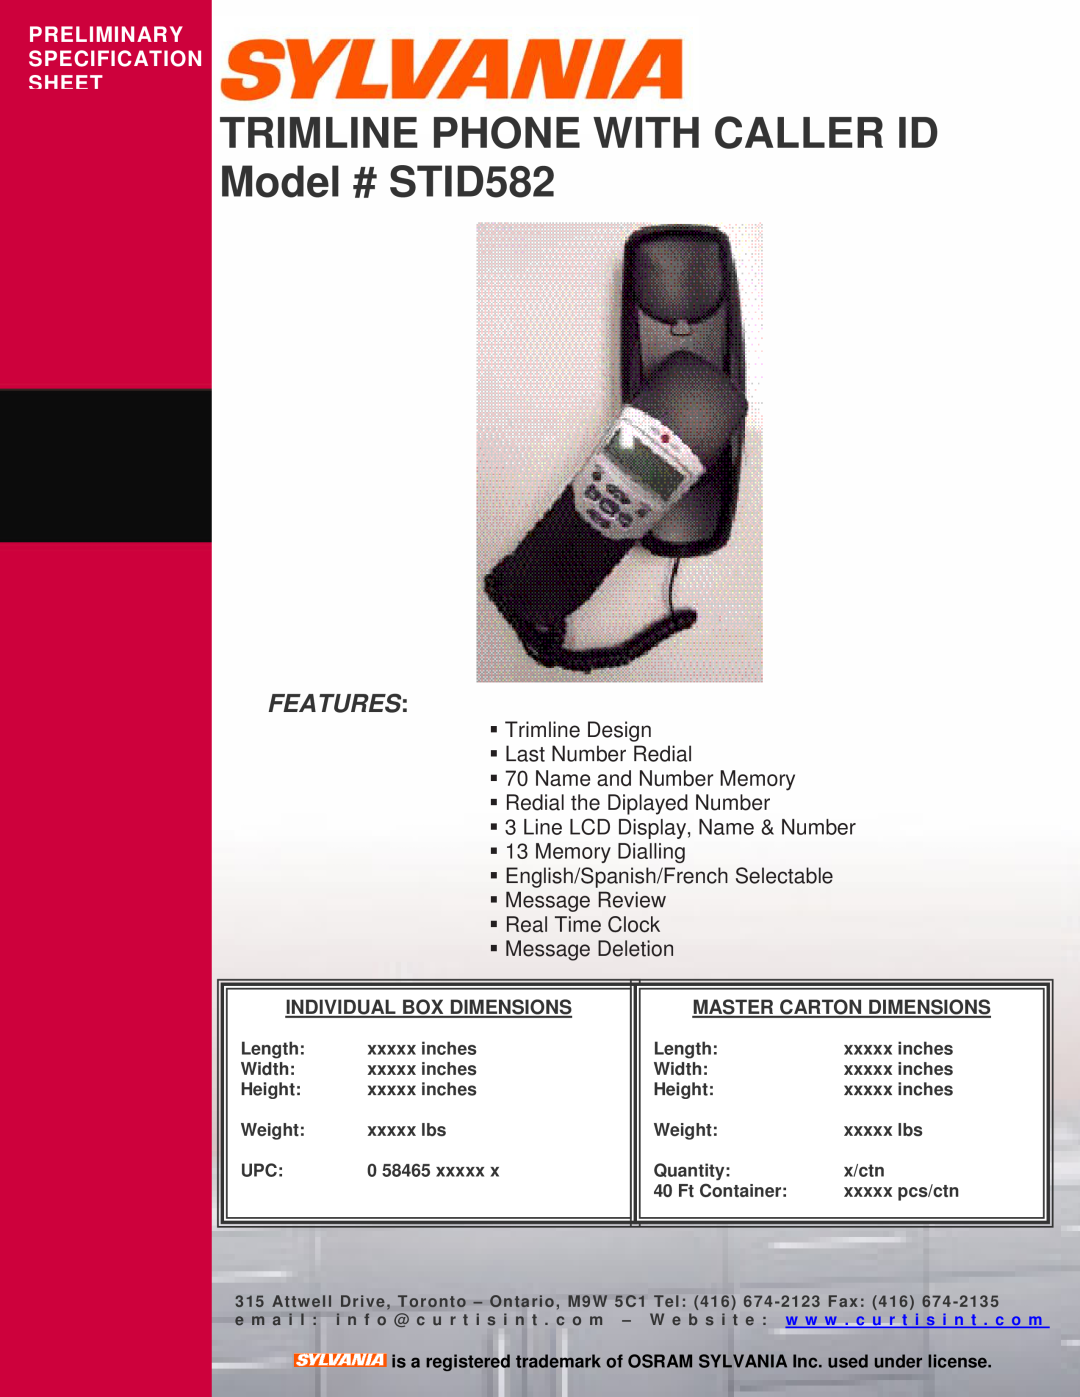 Sylvania specifications TRIMLINE PHONE WITH CALLER ID Model # STID582, Features, Preliminary Specification Sheet 